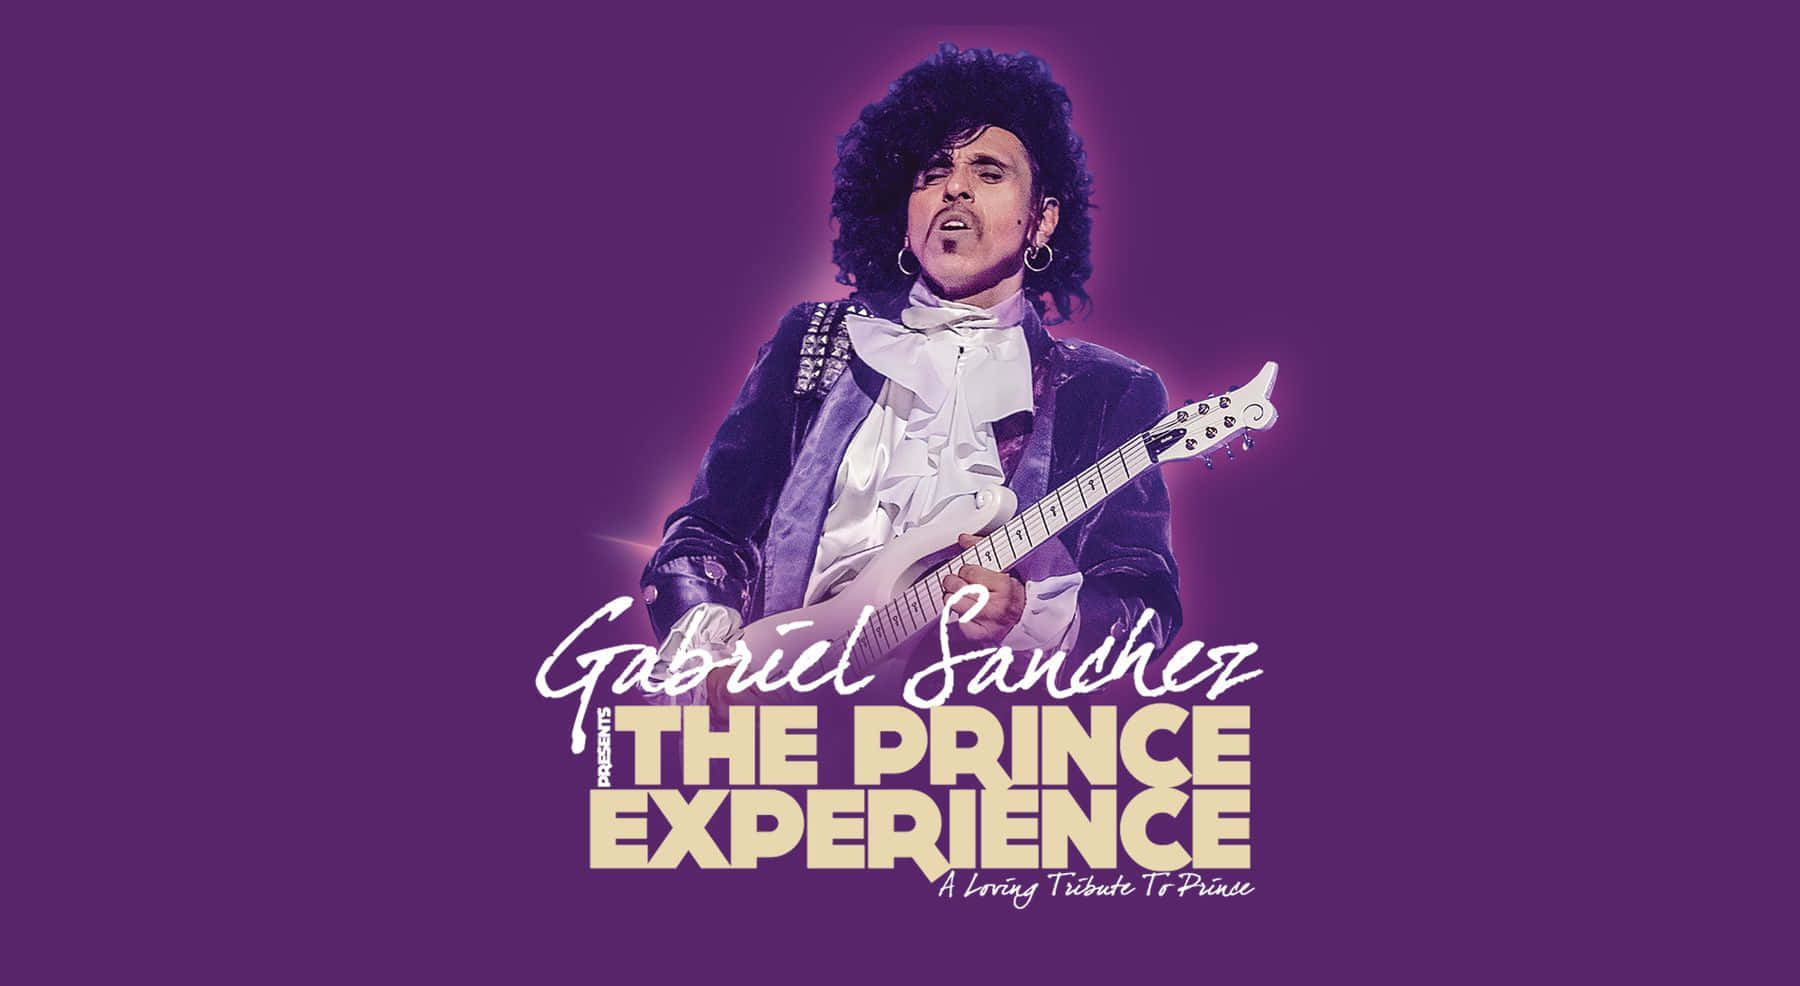 The Prince Experience Poster